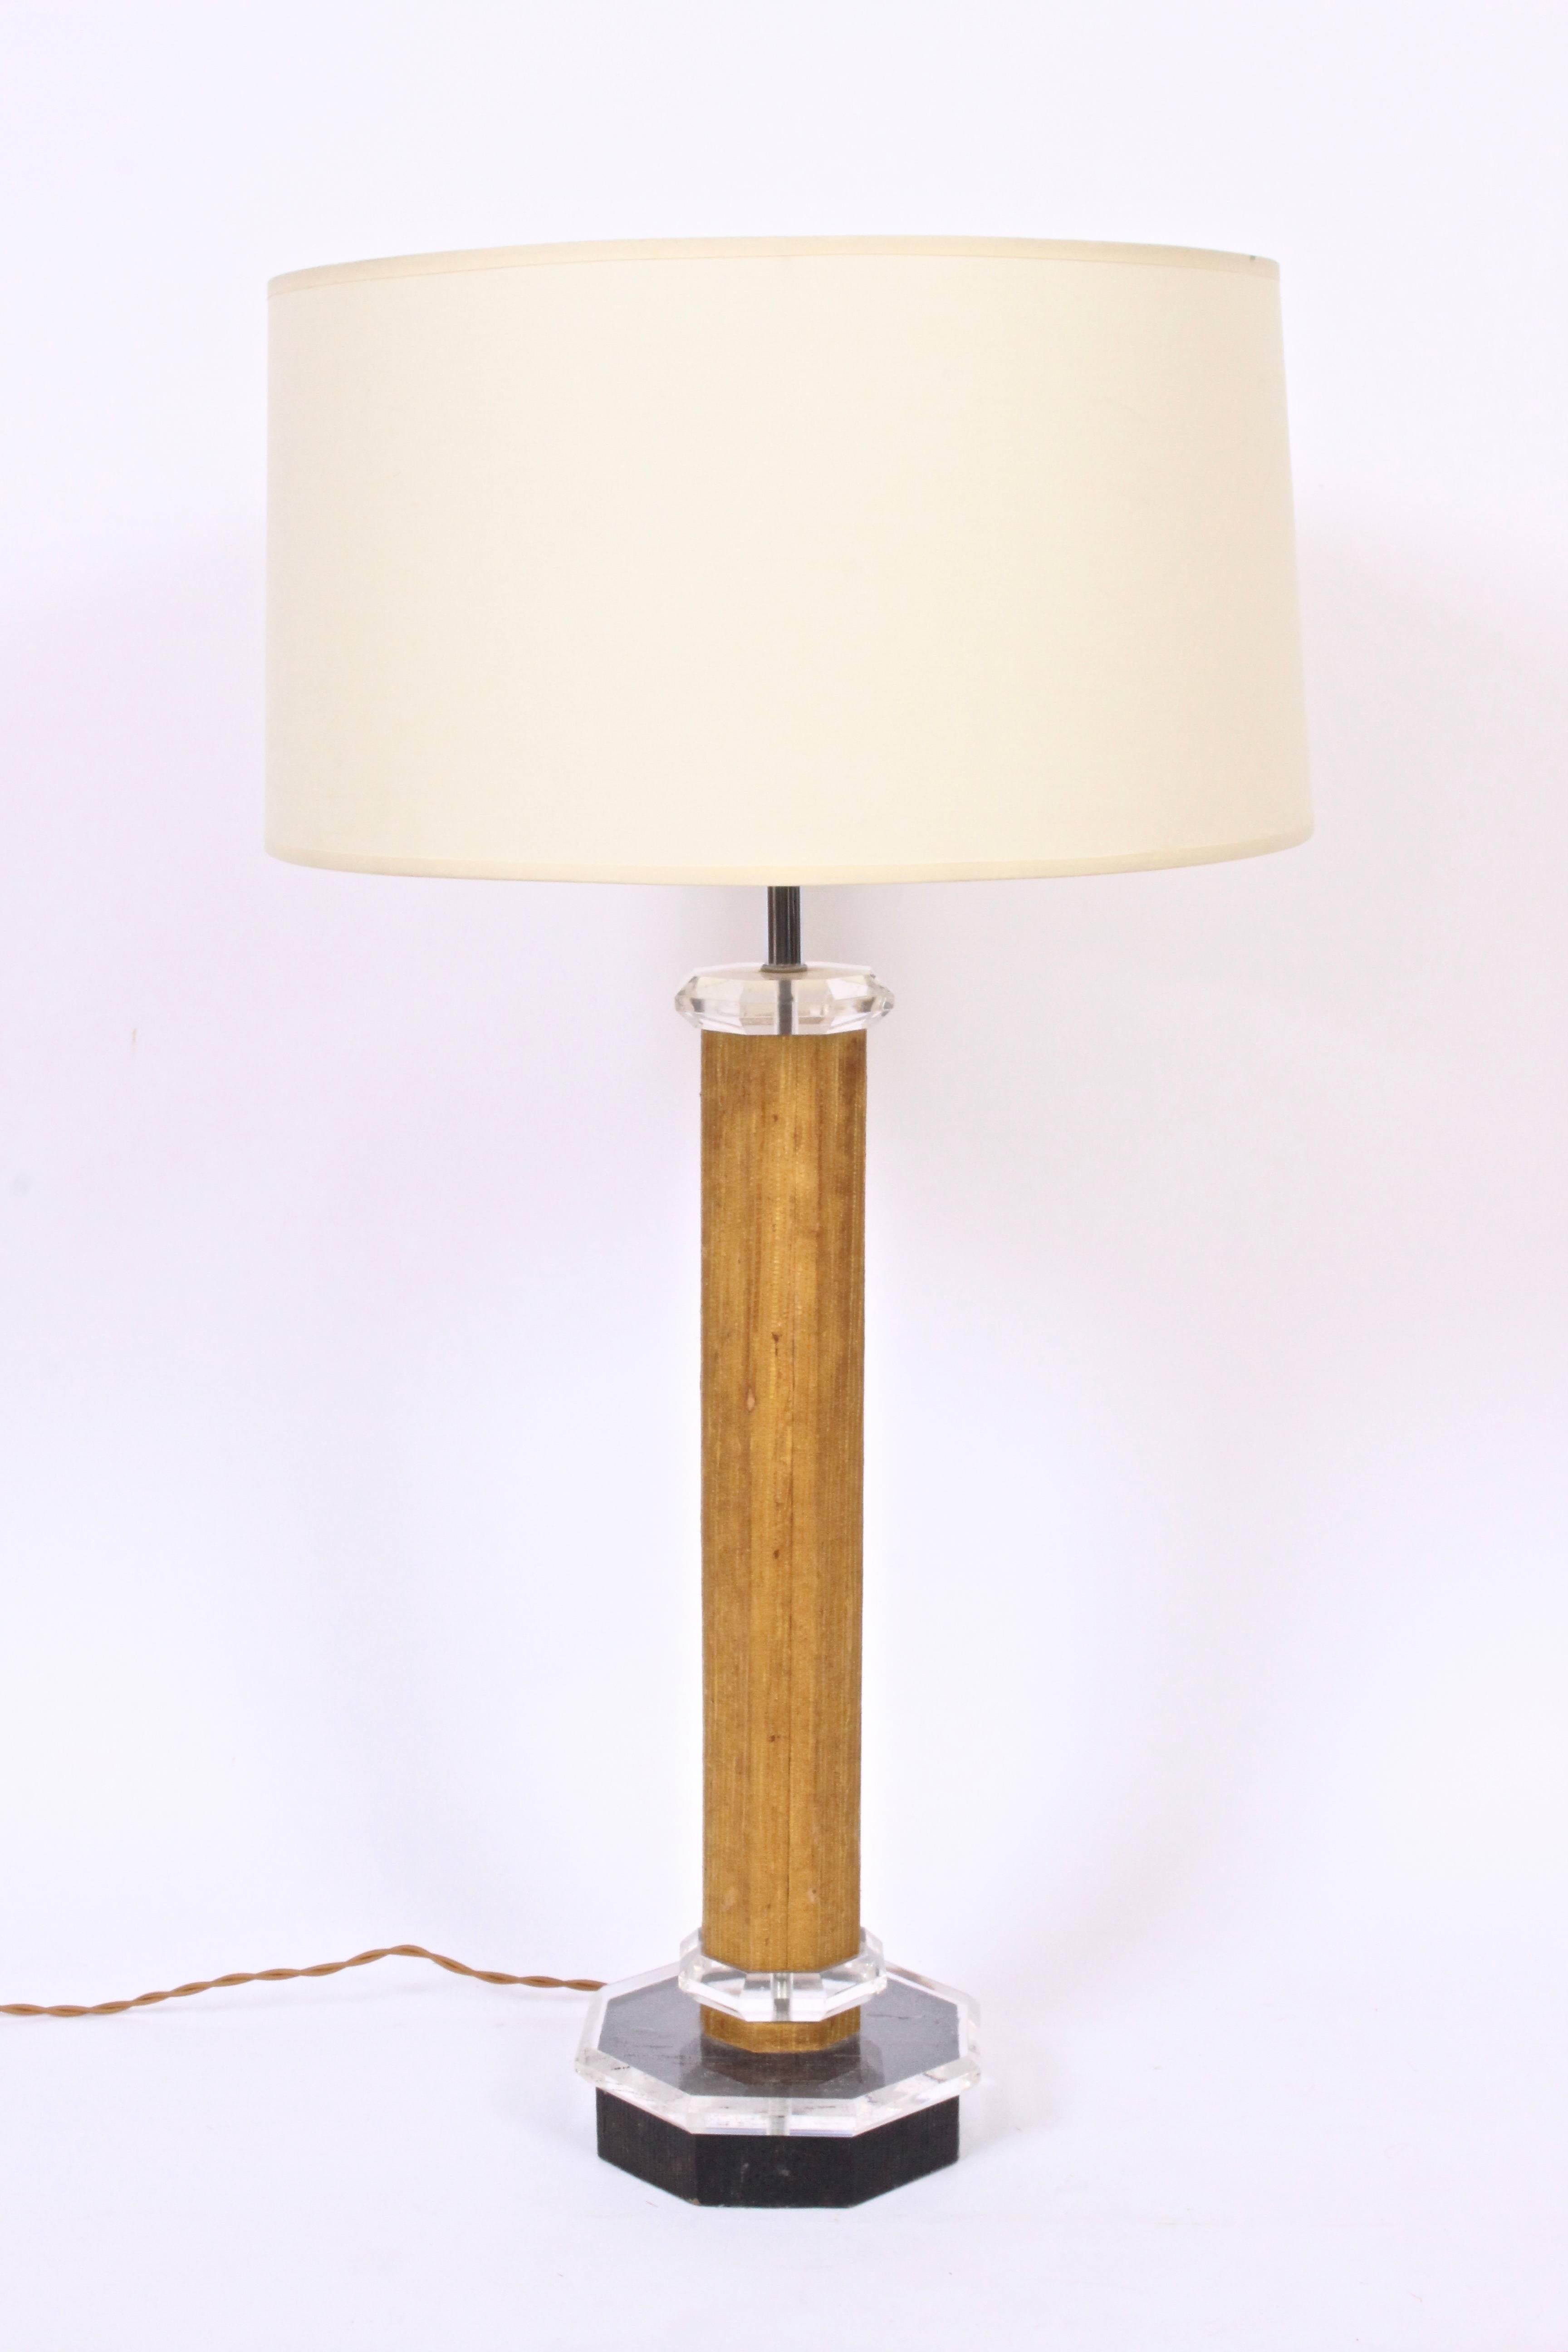 Tall Karl Springer Style Grasscloth, Lucite & Black Enamel Table Lamp, 1970s In Good Condition For Sale In Bainbridge, NY